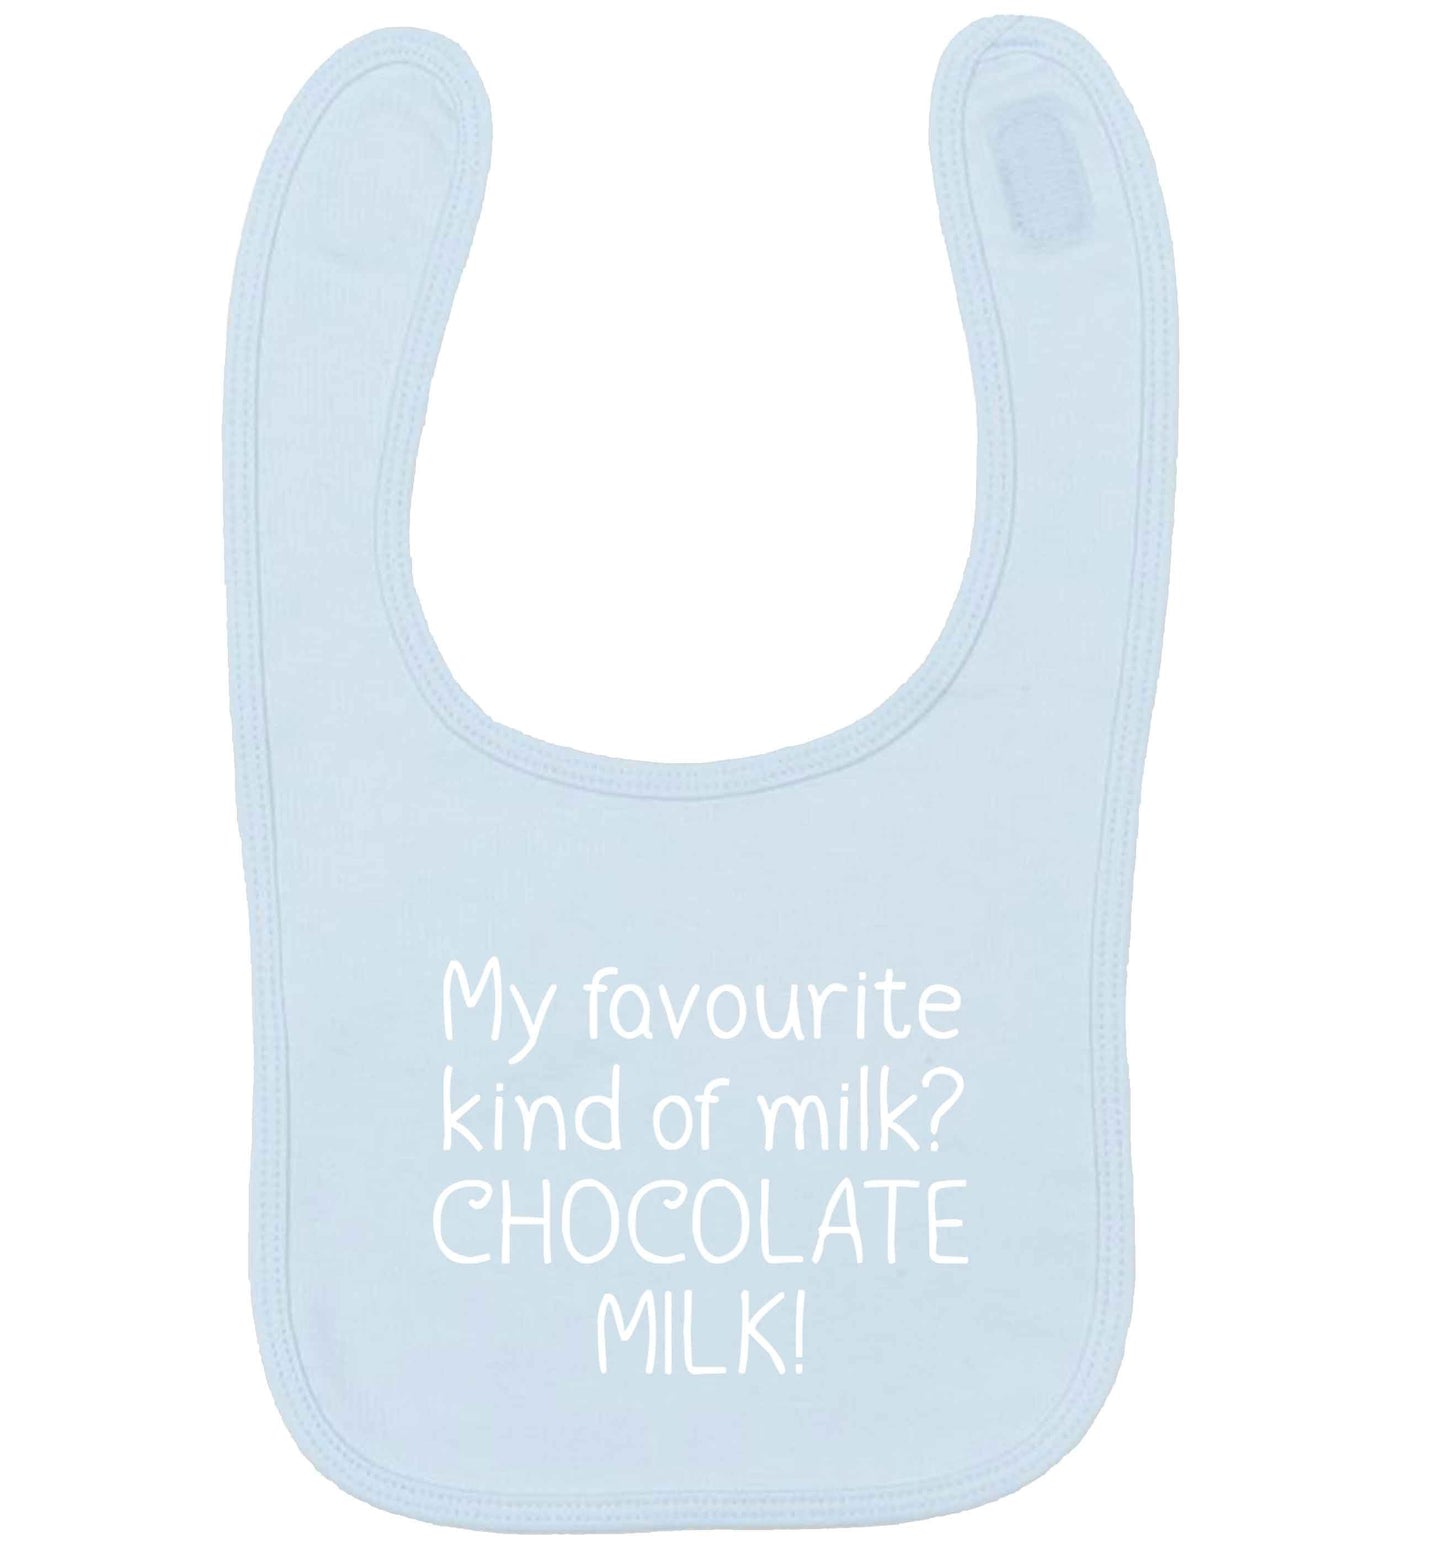 funny gift for a chocaholic! My favourite kind of milk? Chocolate milk! pale blue baby bib